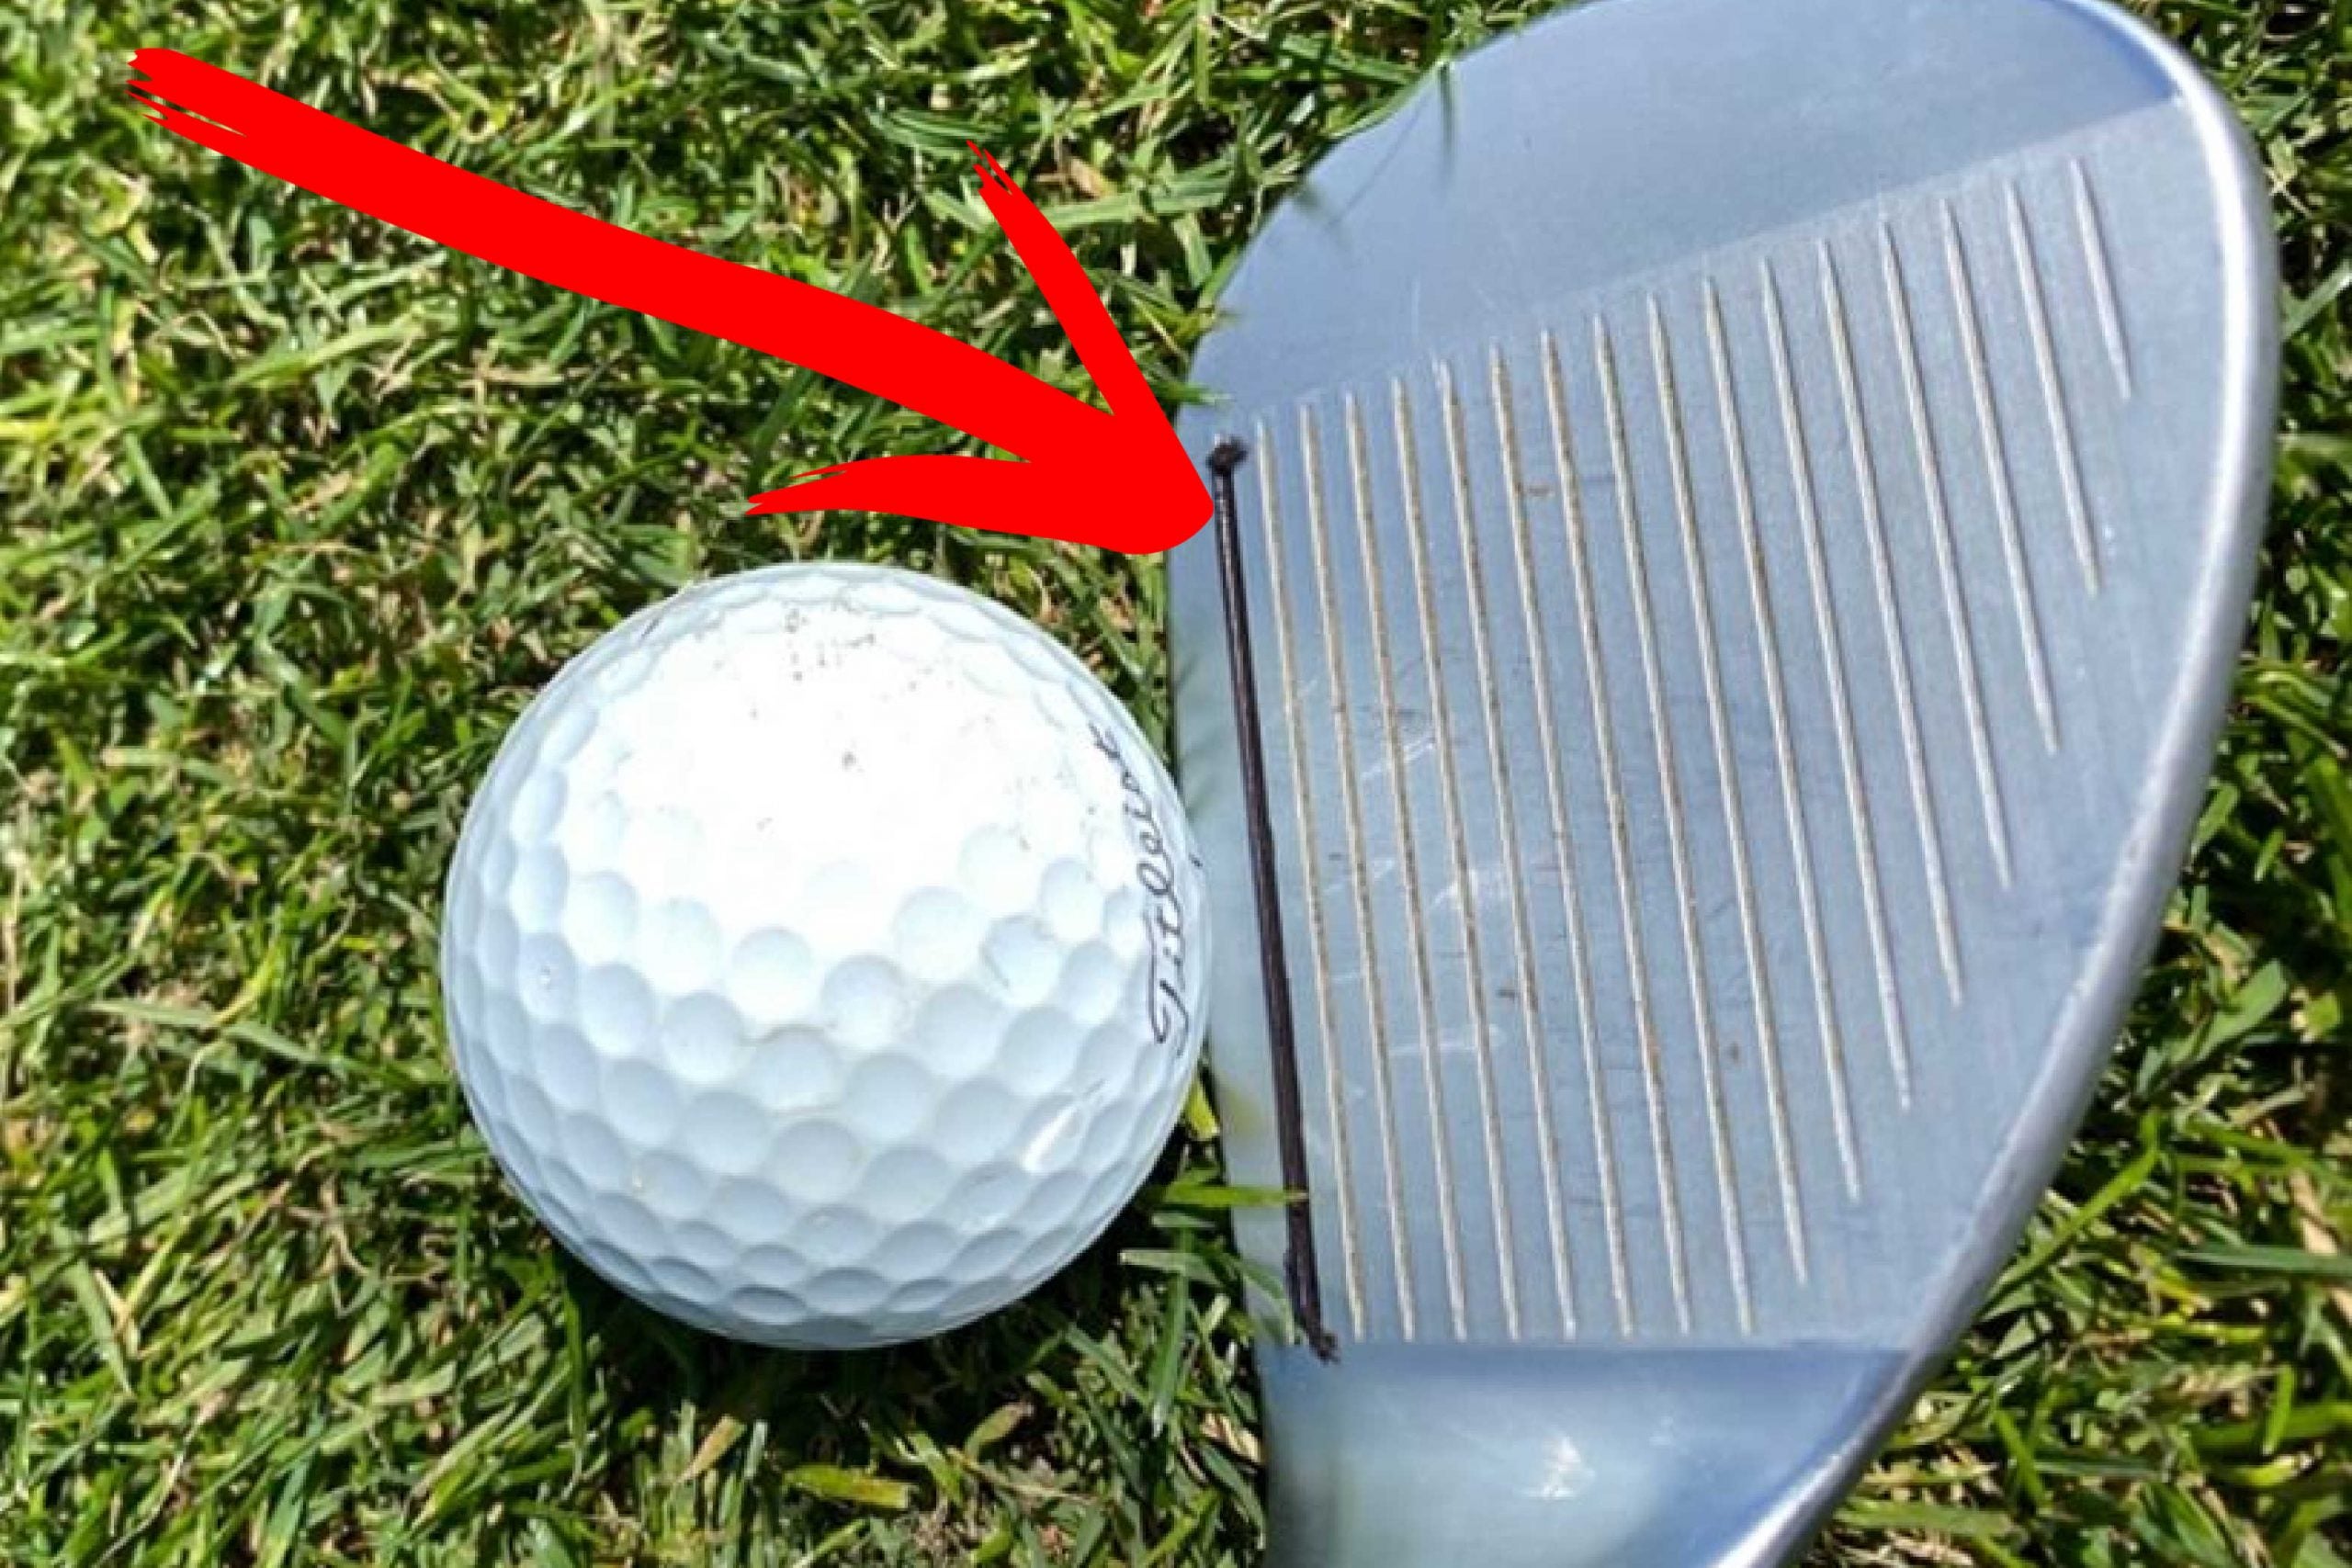 This wedge trick will help you hit crispier chip shots (and it's 100% legal)